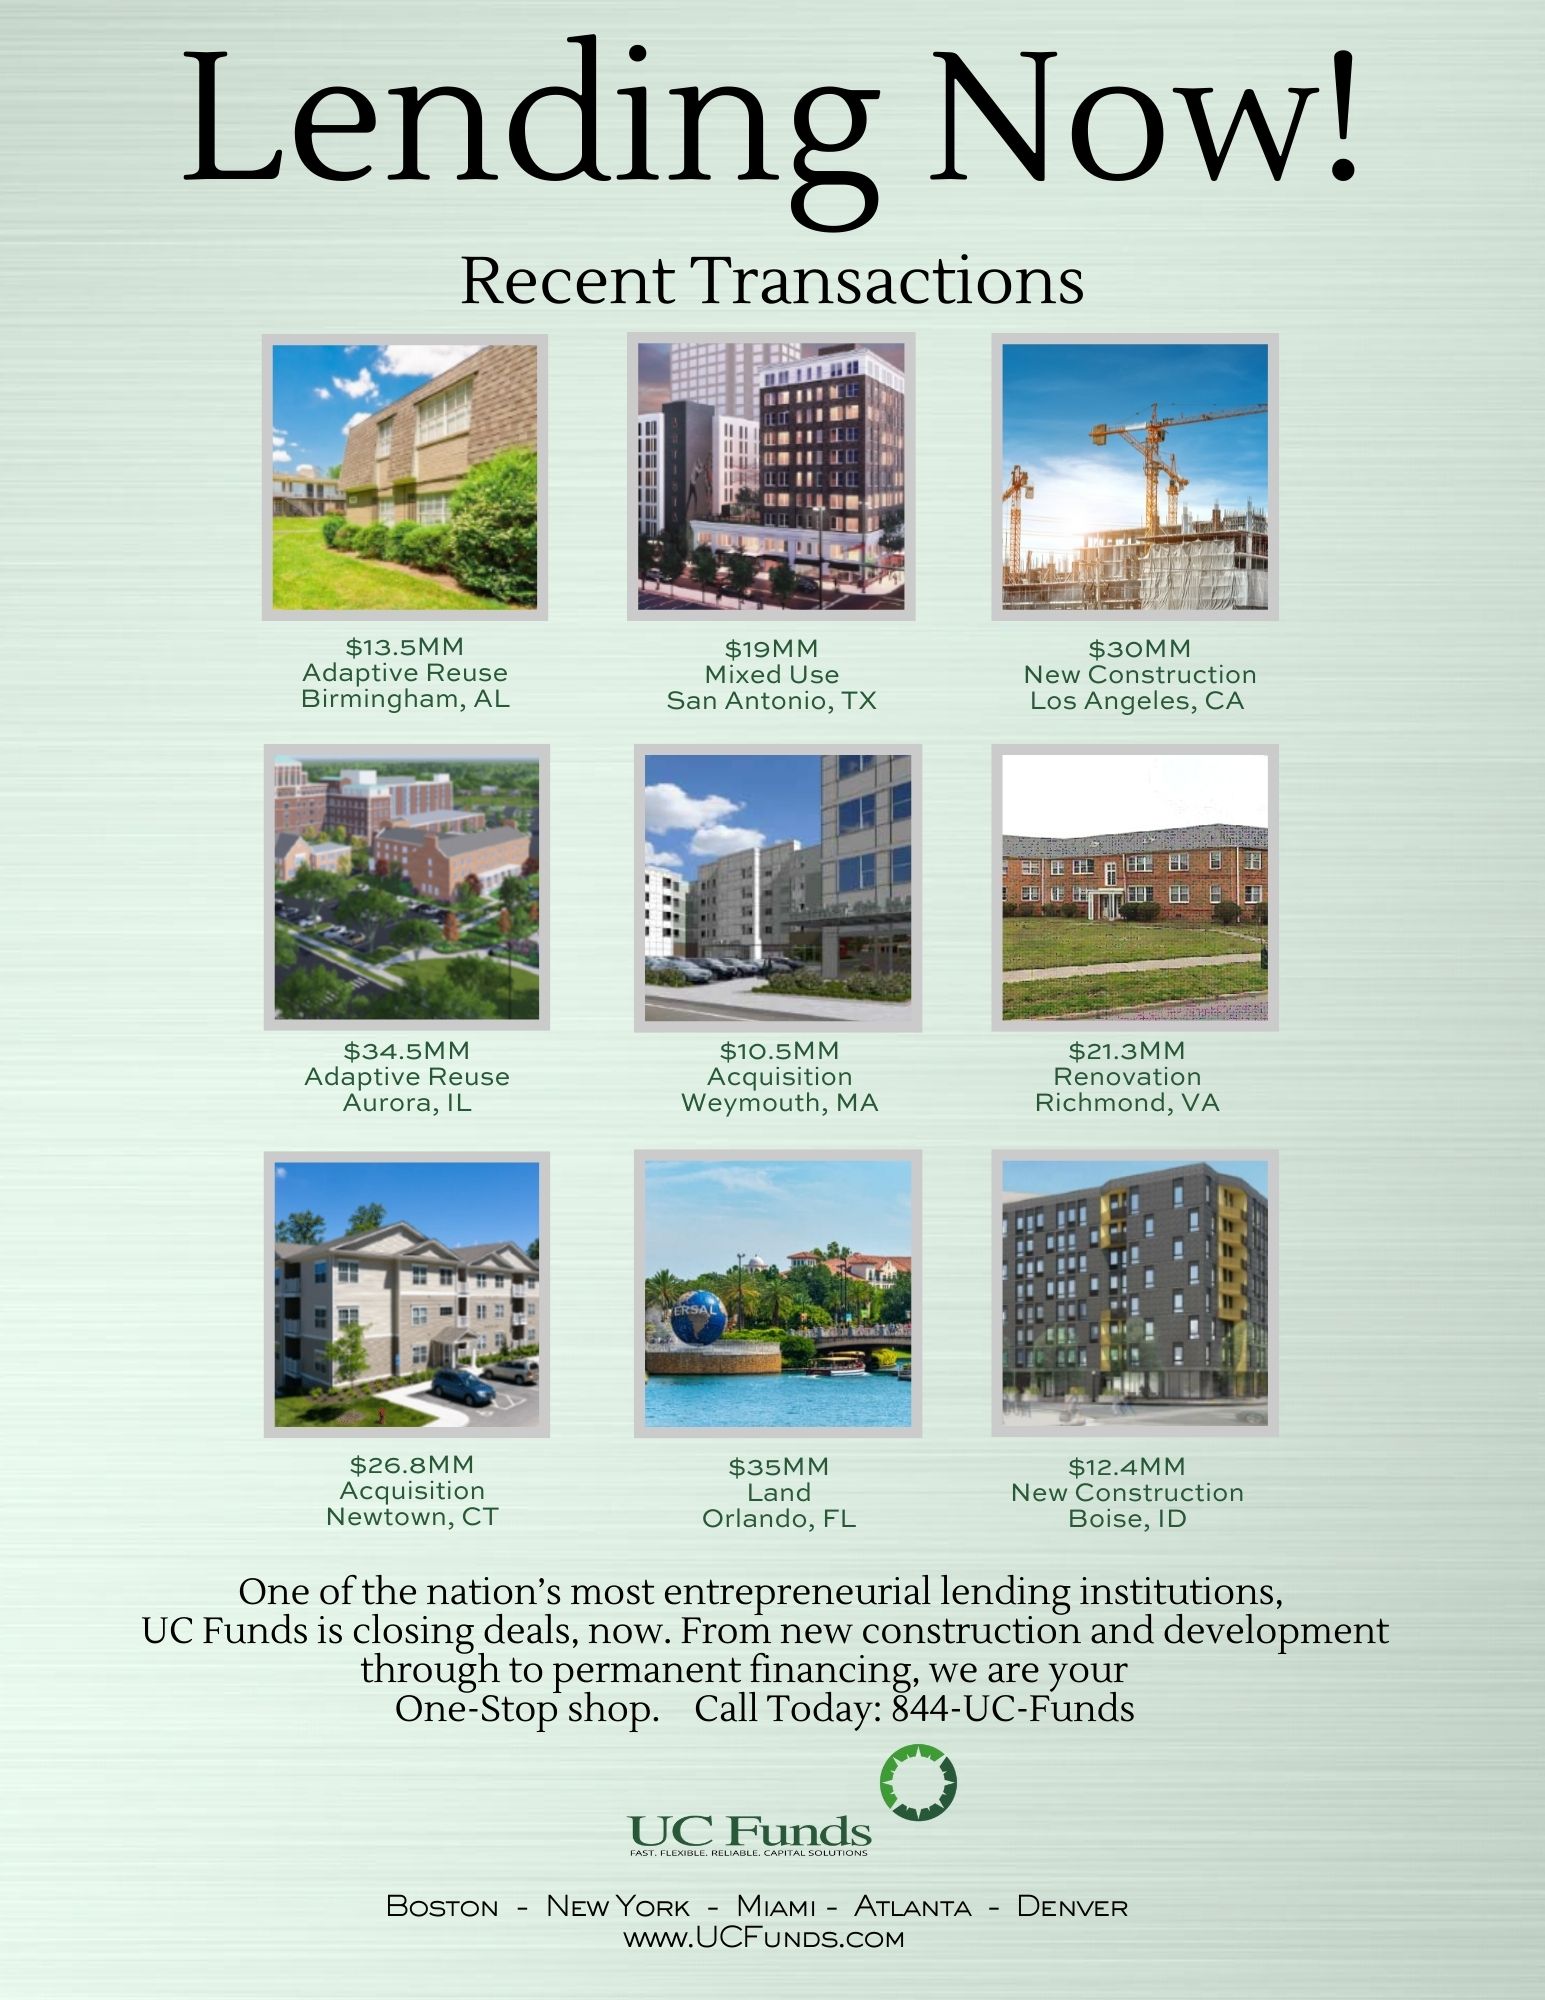 UC Funds Commercial Real Estate lending